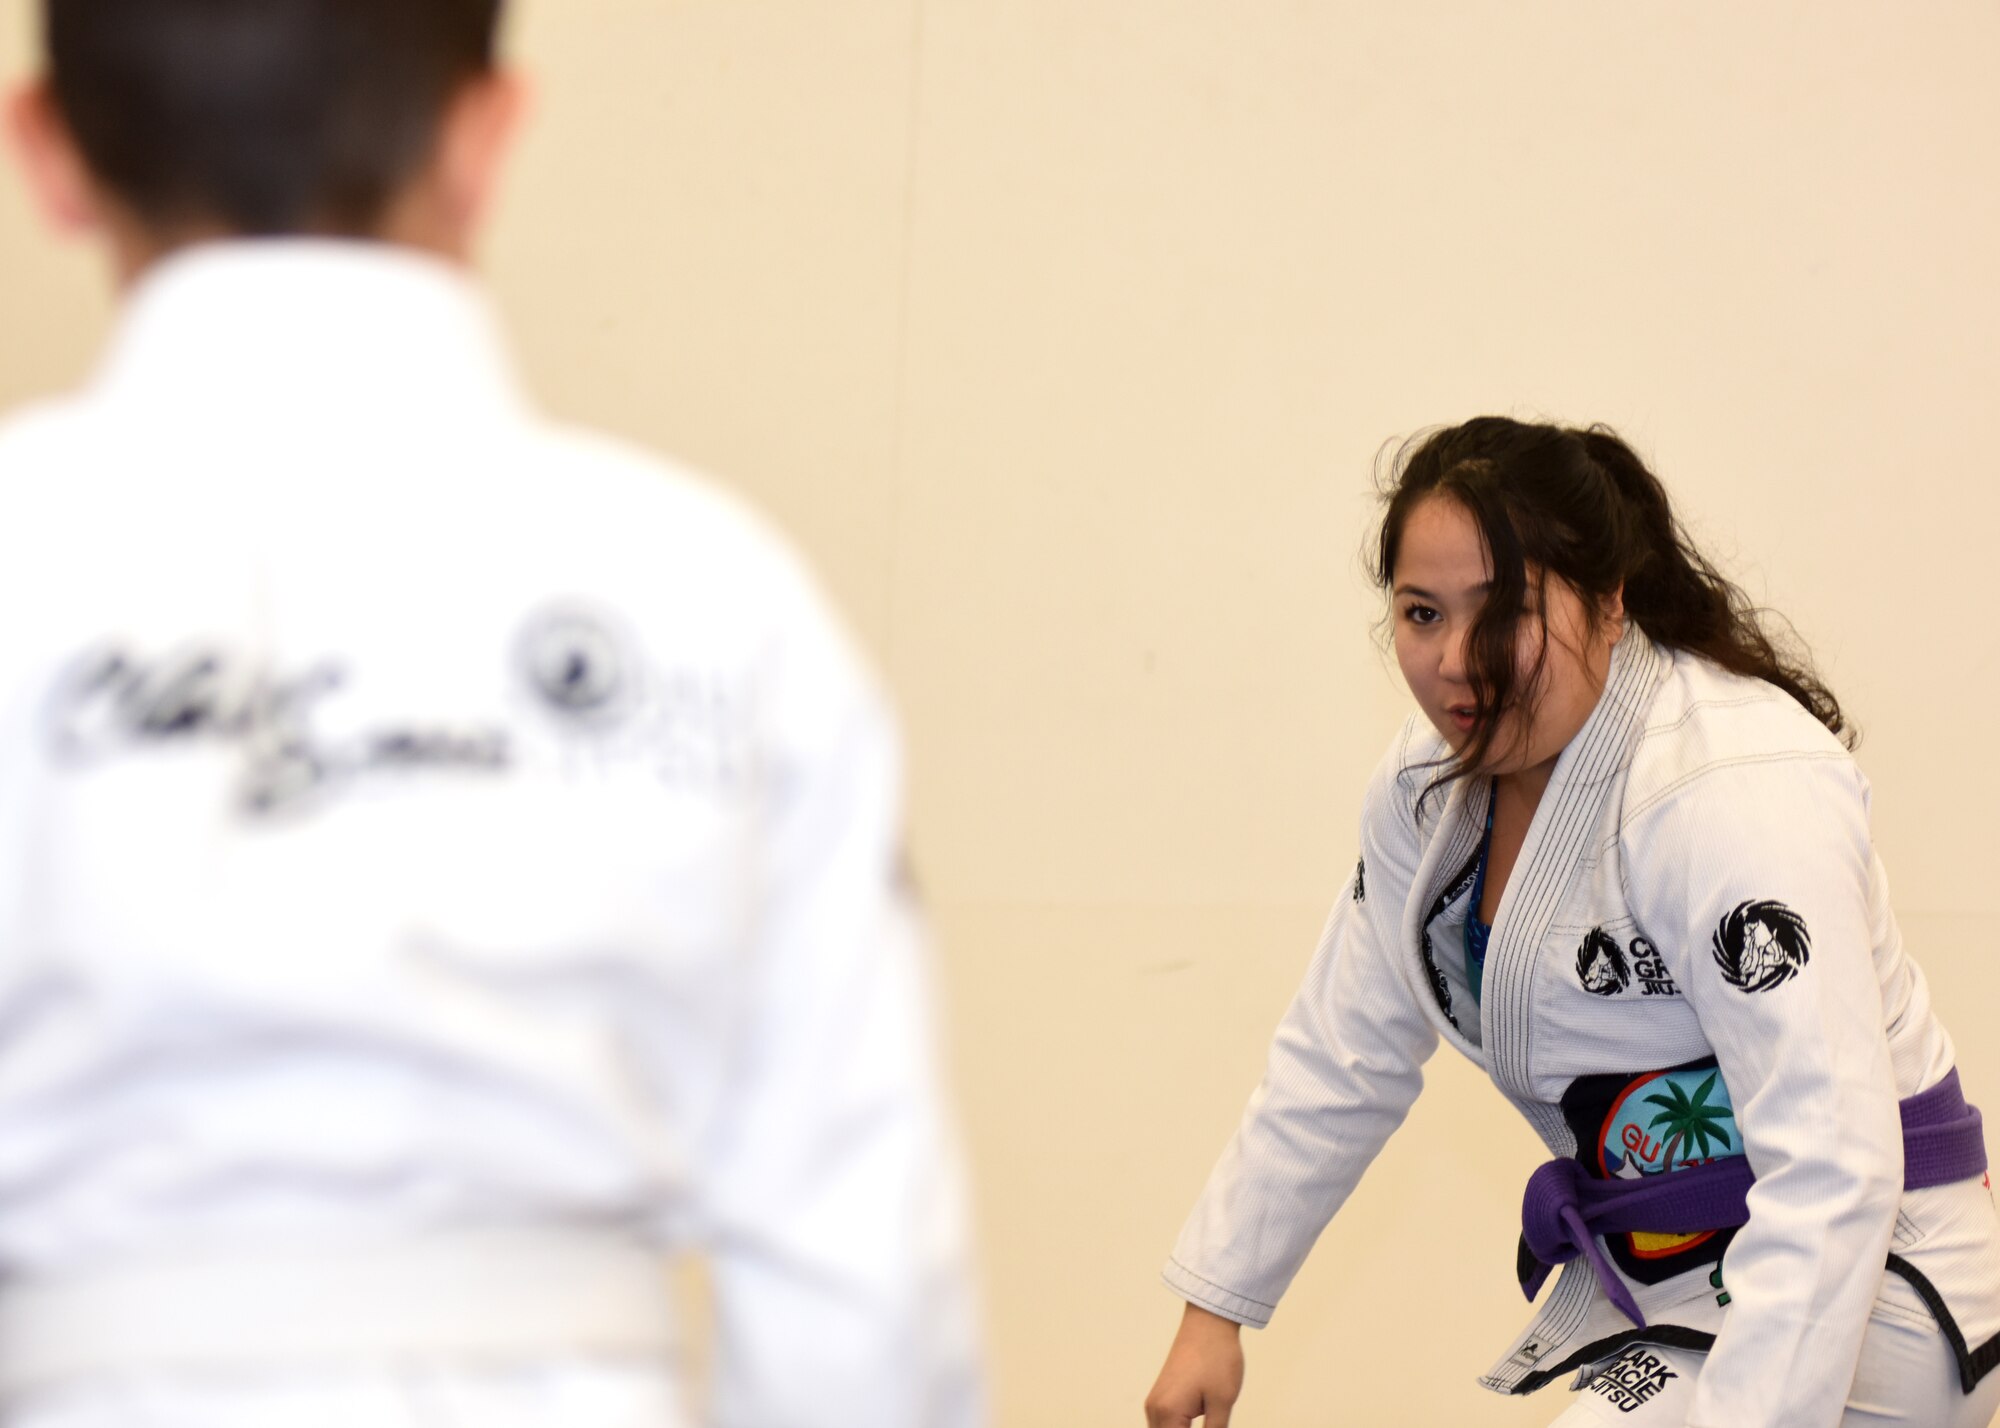 People in white uniforms practice martial arts on a  blue mat.